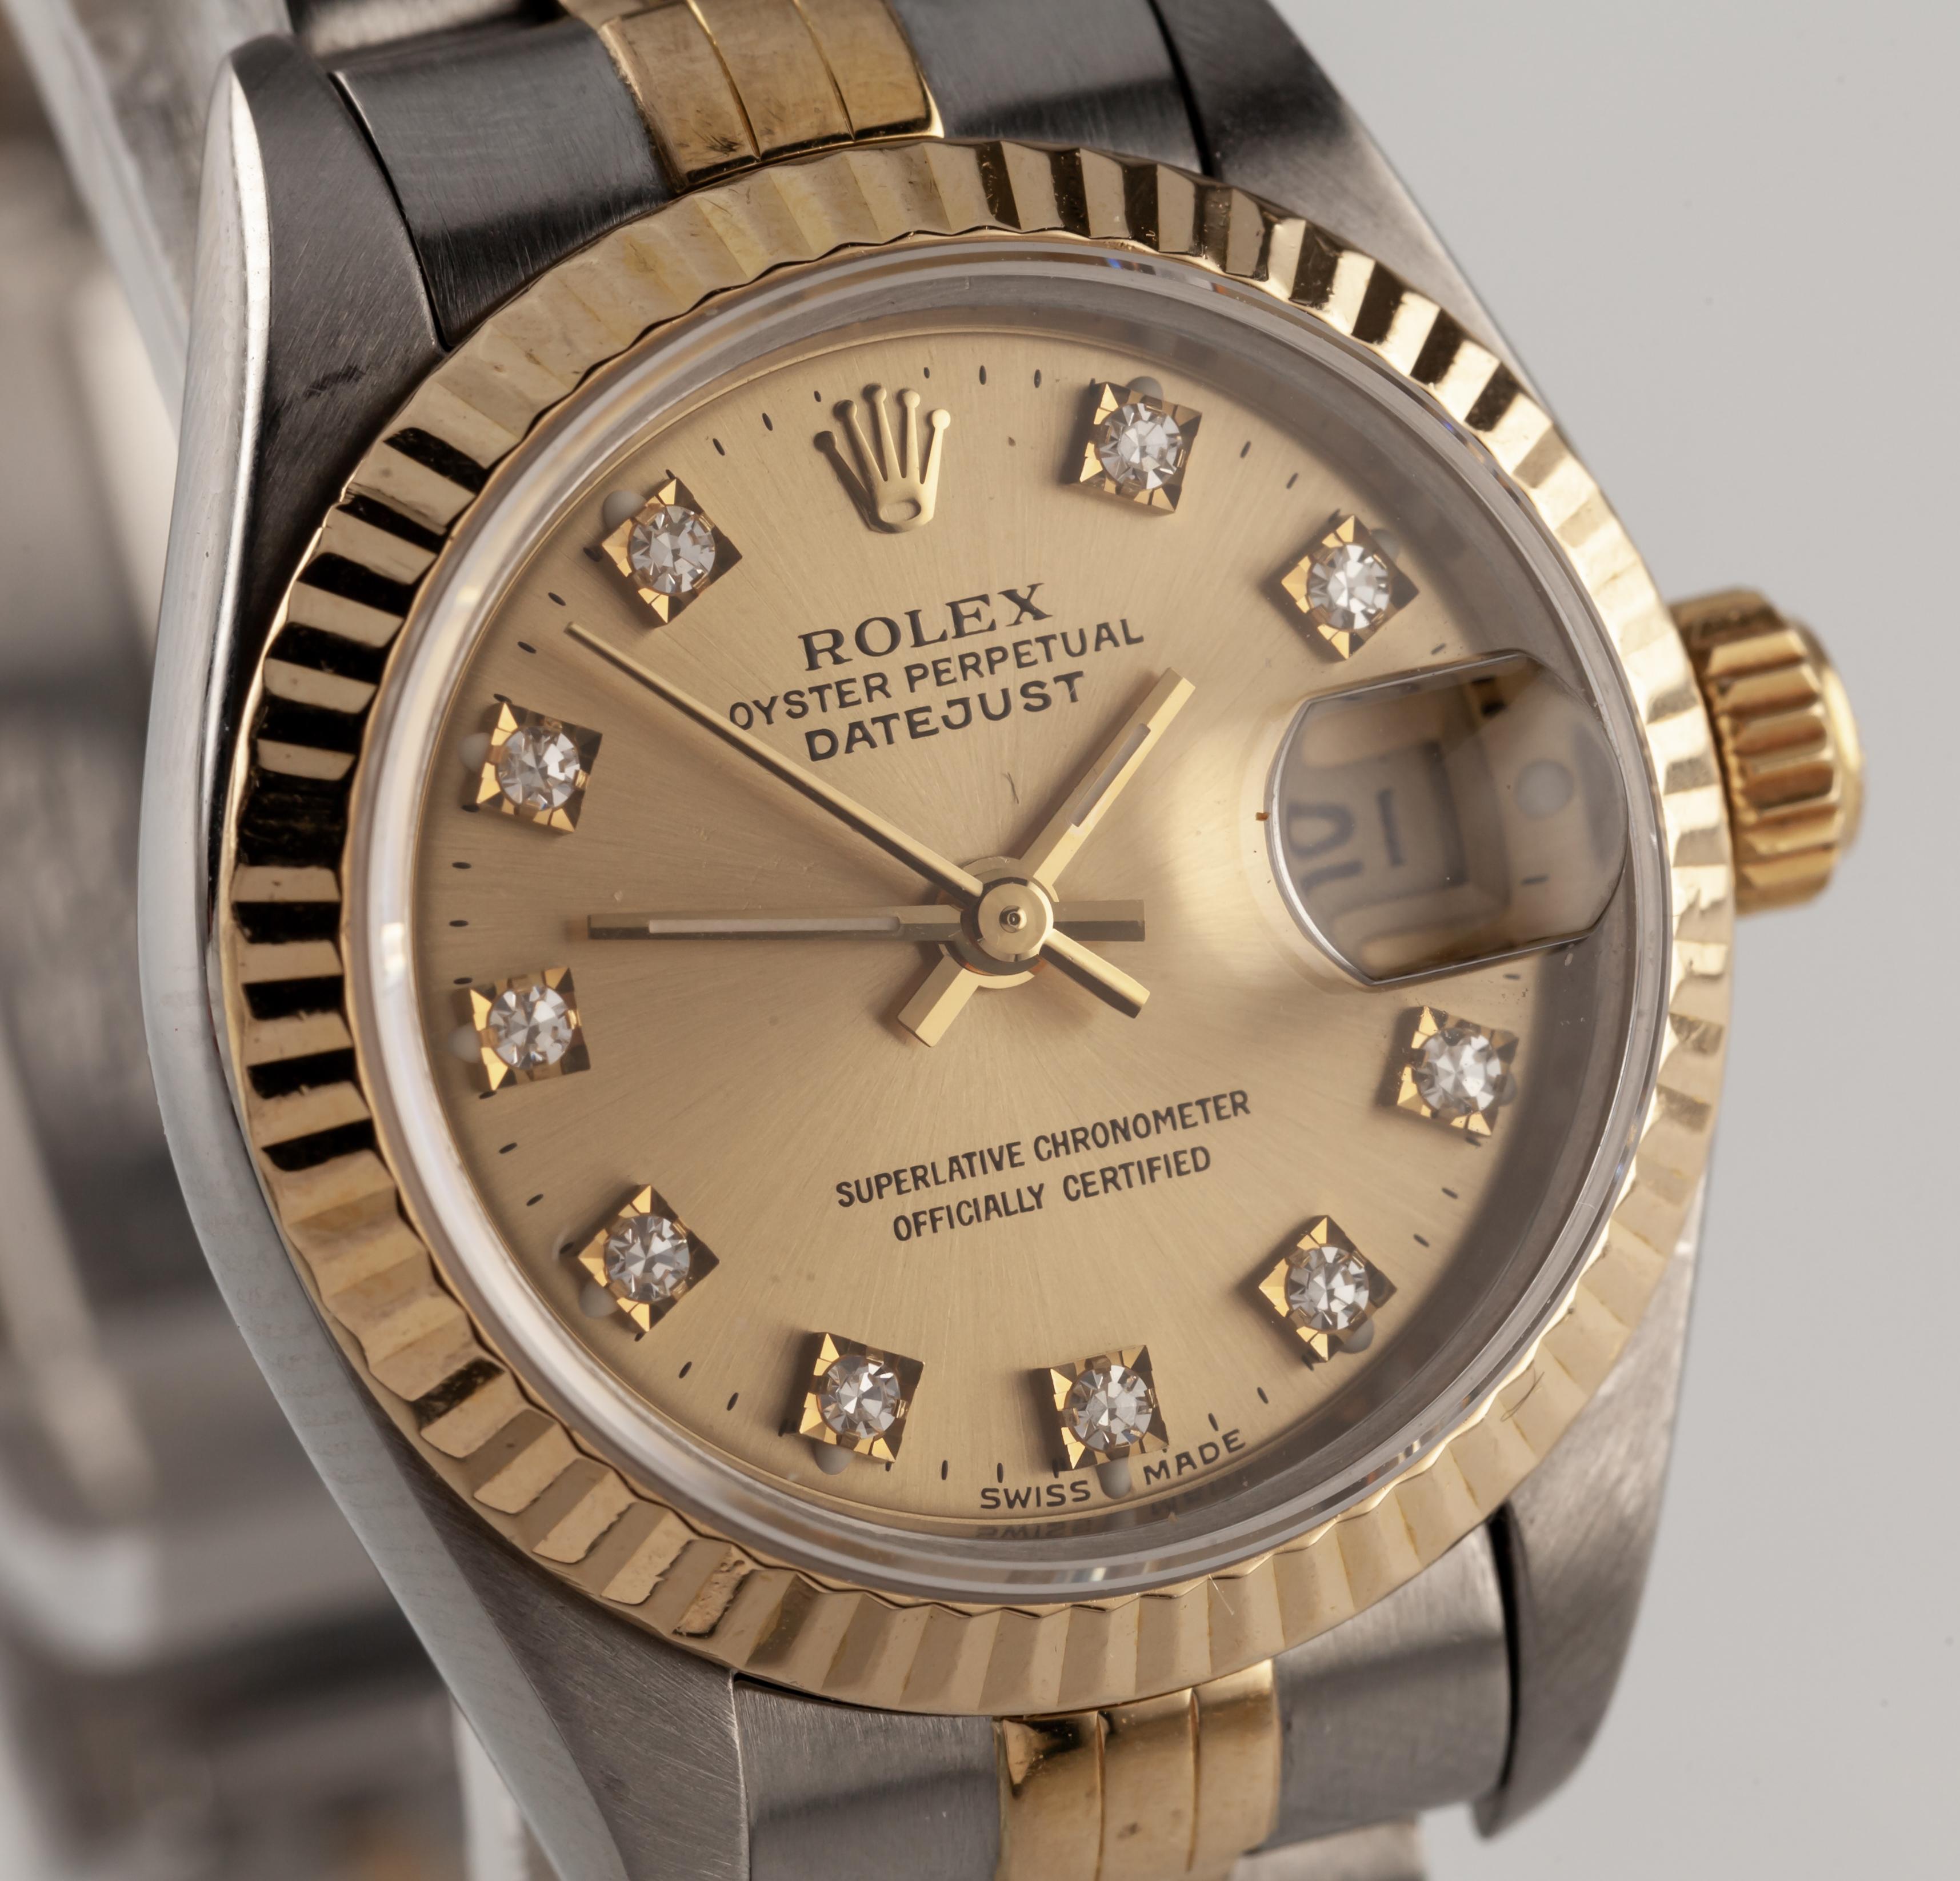 Rolex Women's Two-Tone Datejust w/ Diamond Dial Jubilee Band 69173
Model #69173
Serial #X6097XX
Movement #2135
Movement Serial #25875XX
Year: 1991
Stainless Steel Round Case with Fluted Gold Bezel
26 mm in Diameter (27 mm w/ Crown)
Lug-to-Lug Width